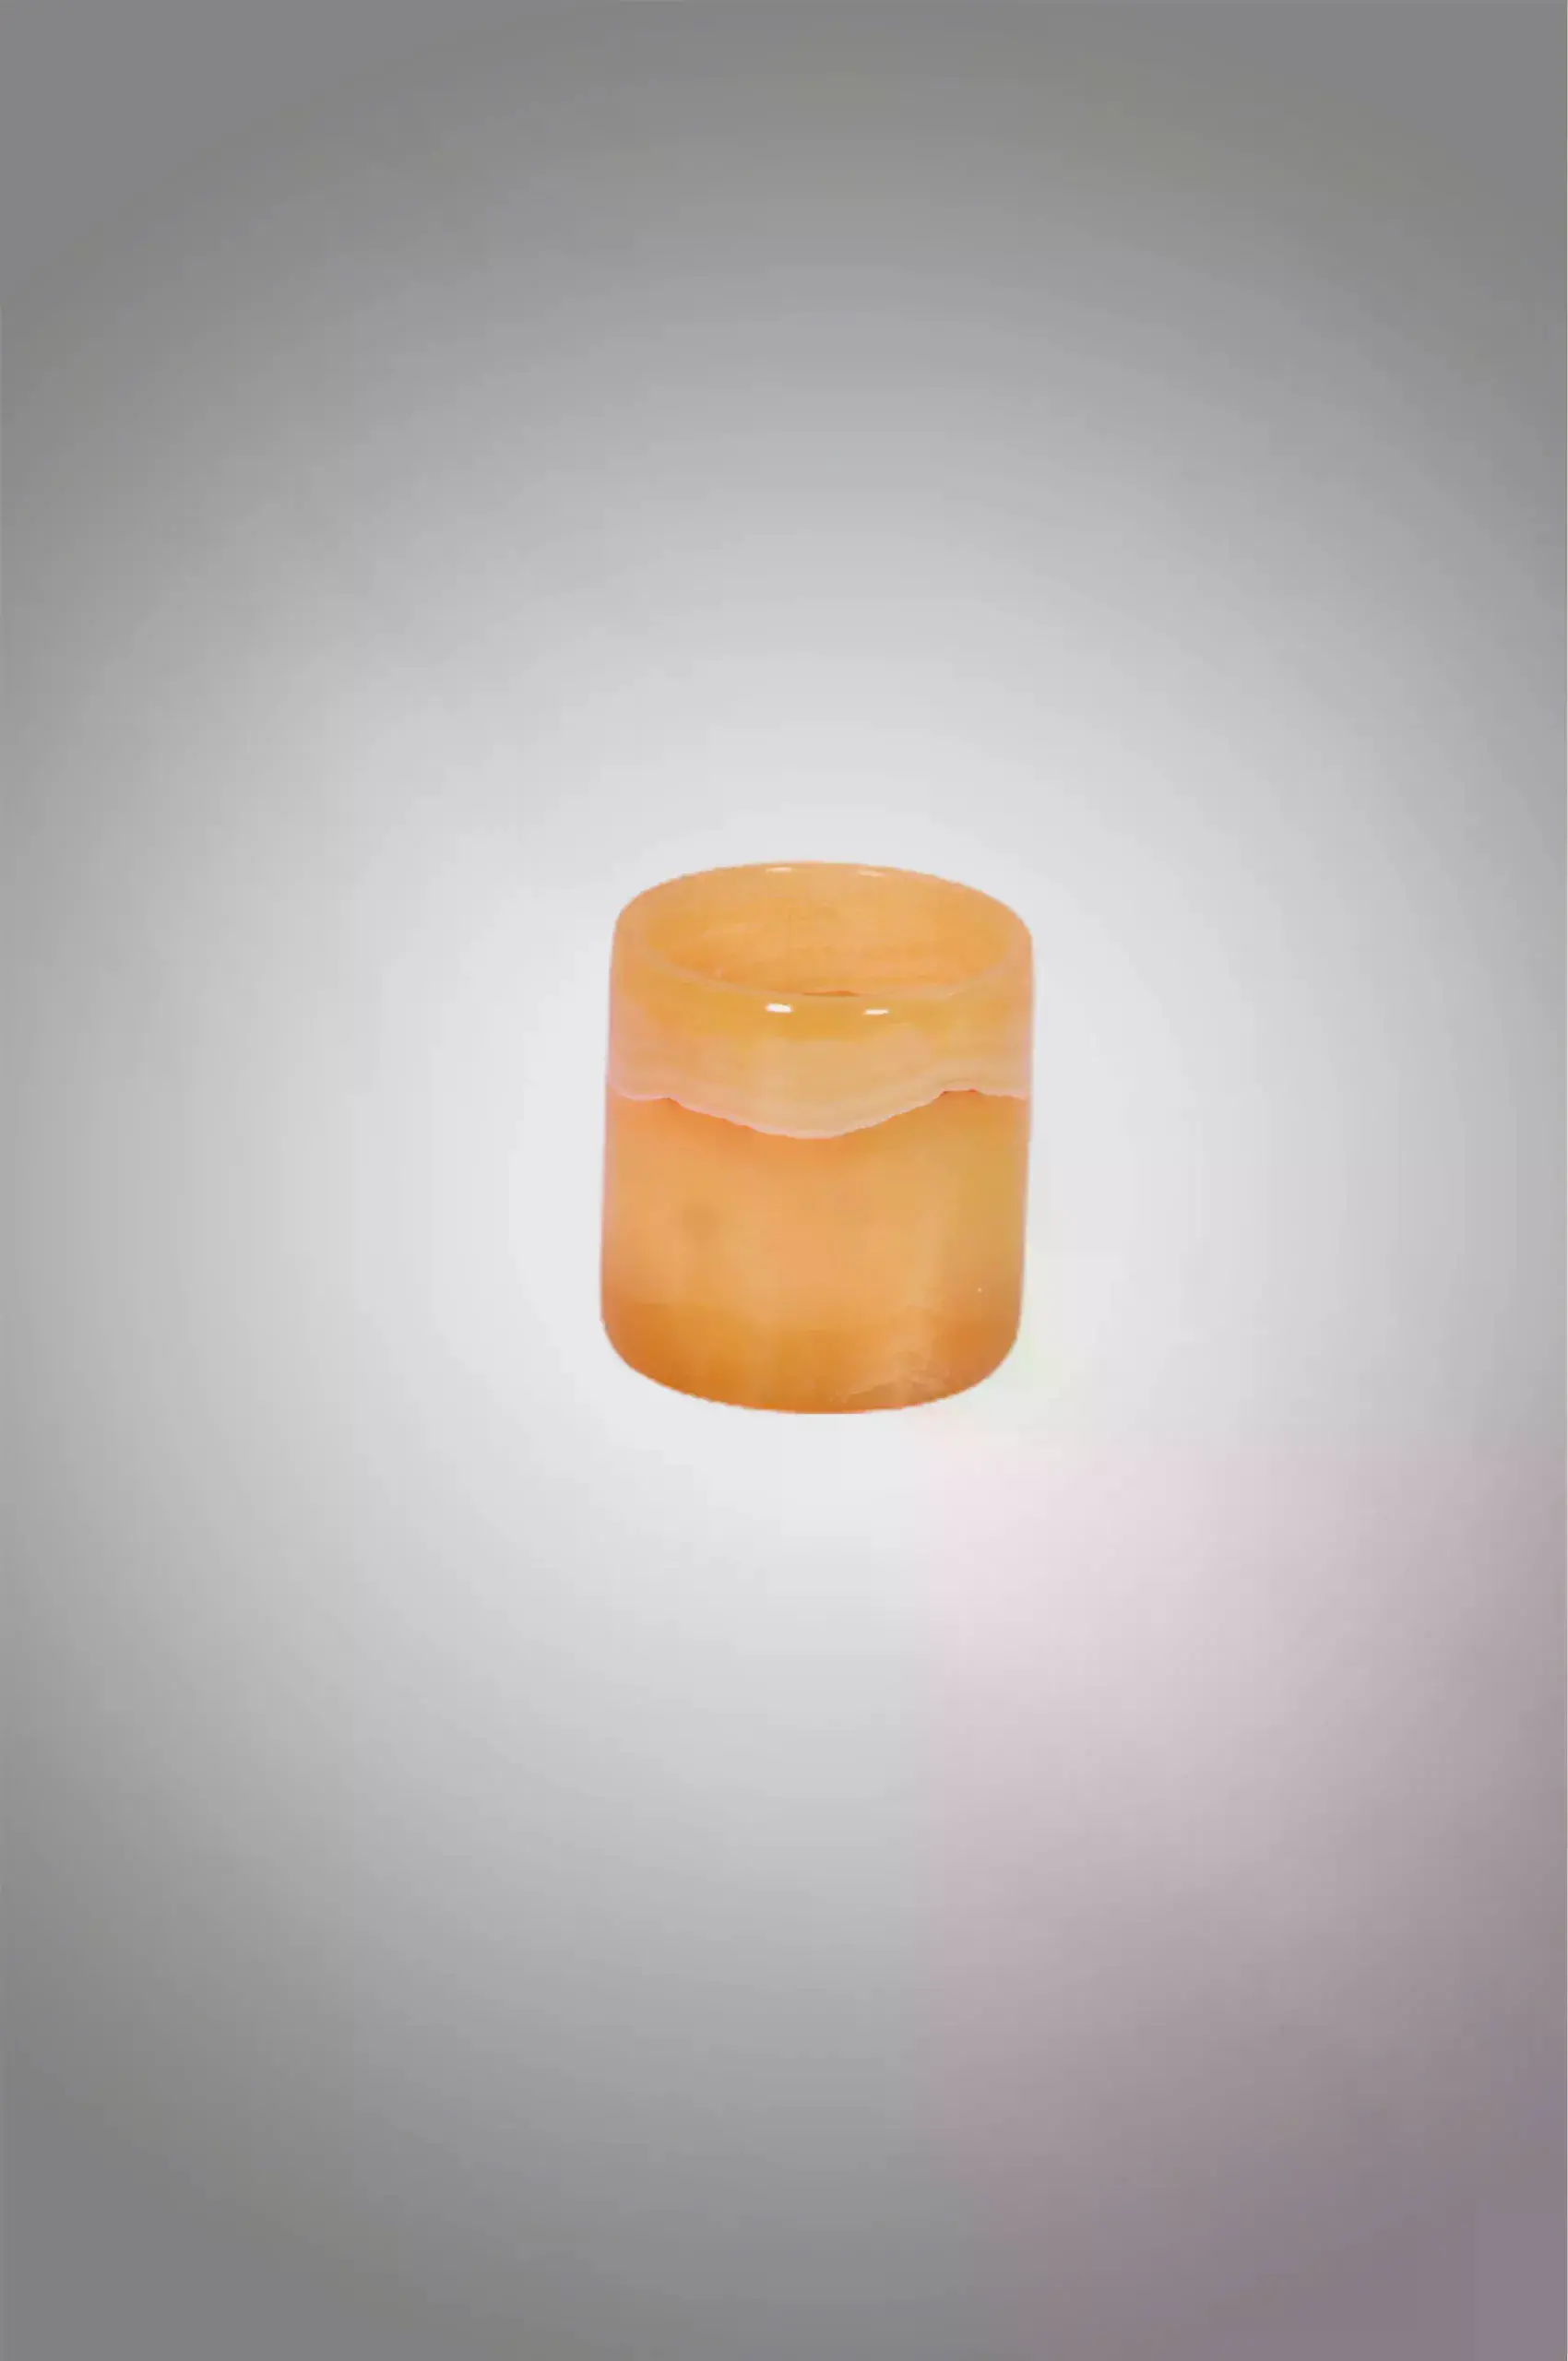 Natural alabaster stone handmade candle holder could be a pen